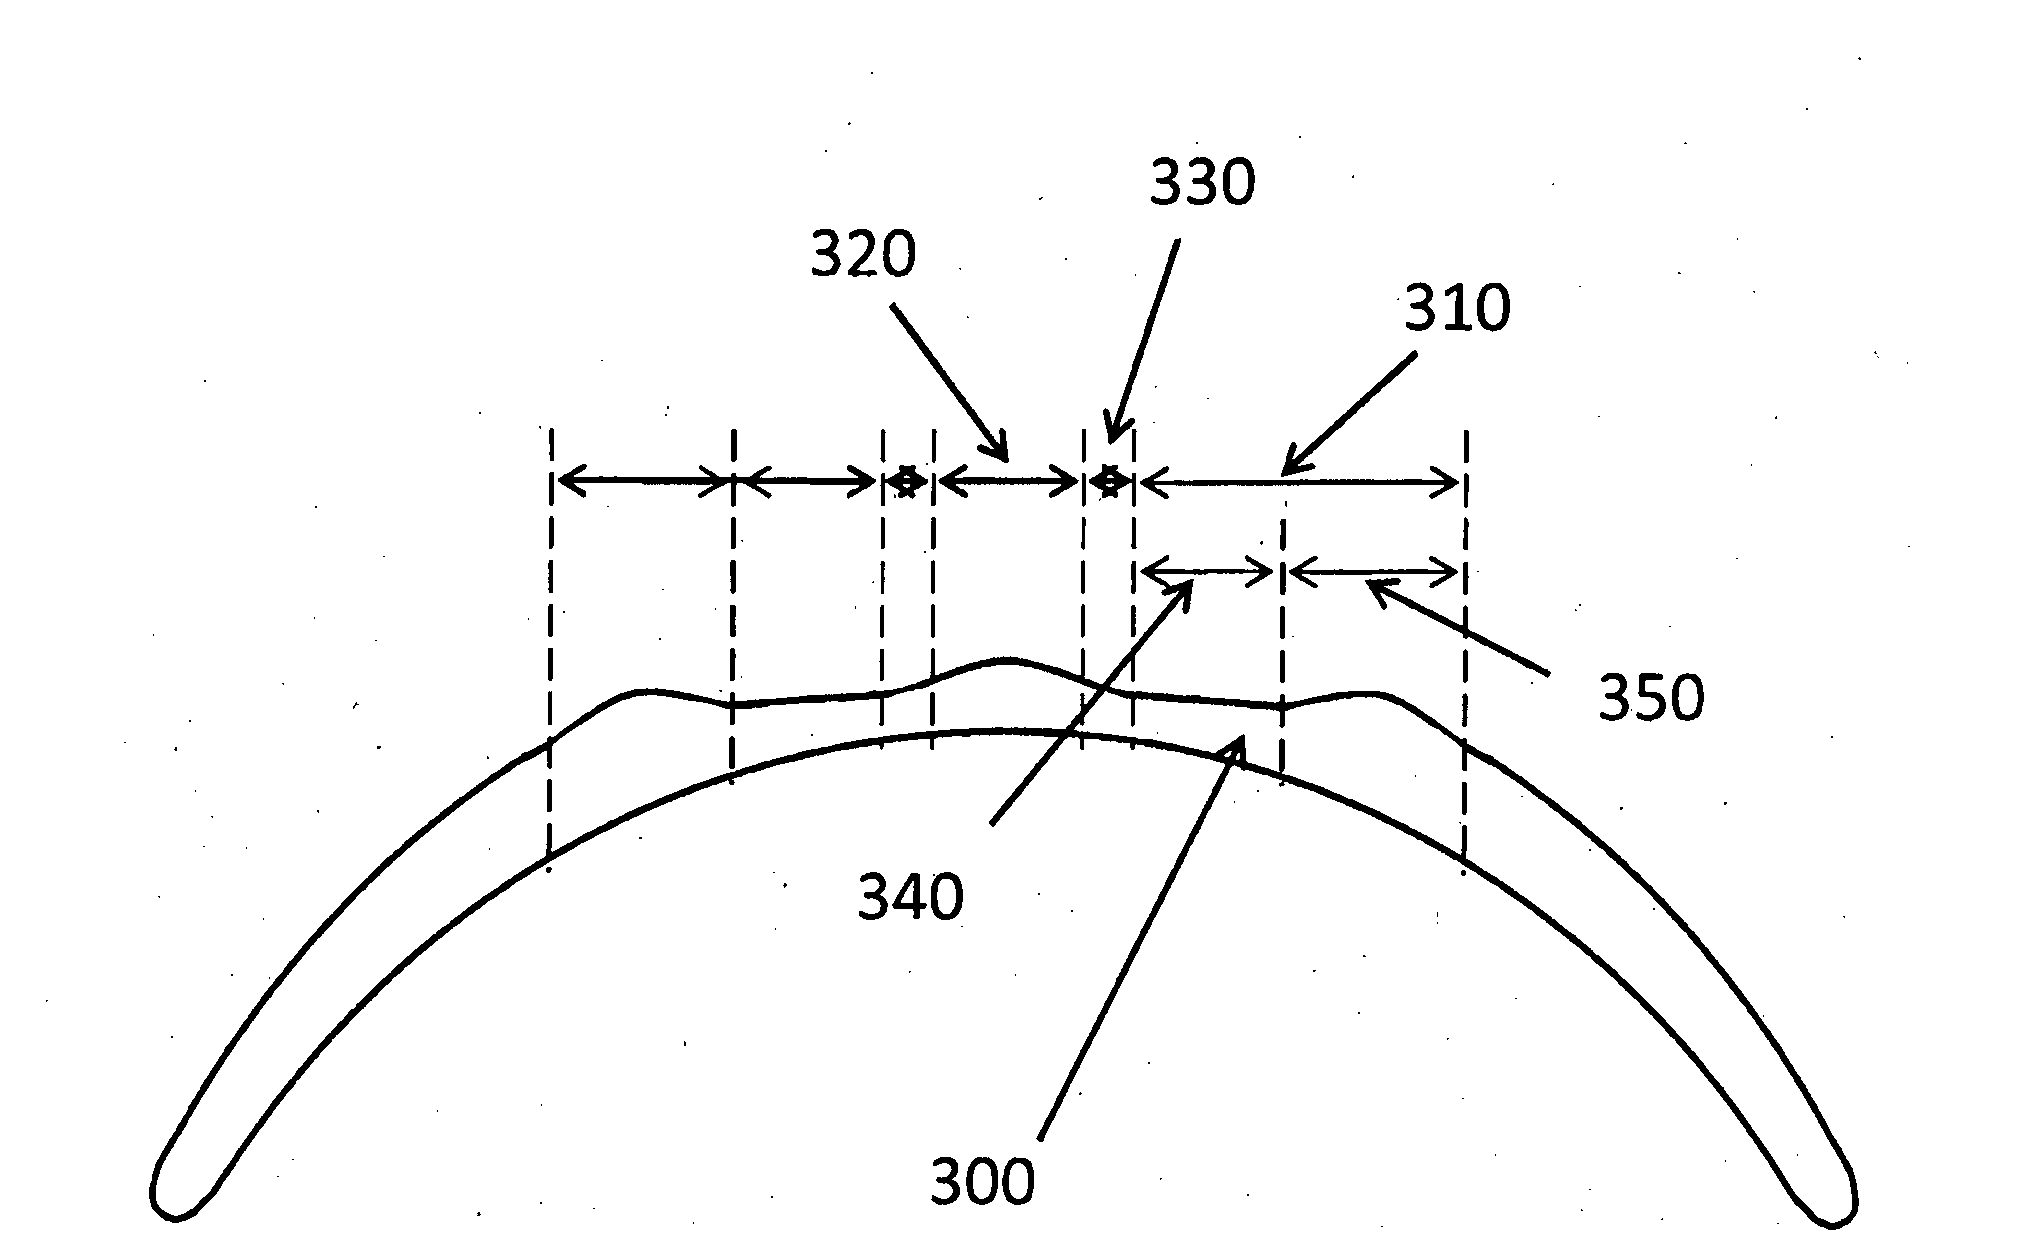 Corneal remodelling contact lenses and methods of treating refractive error using corneal remodelling